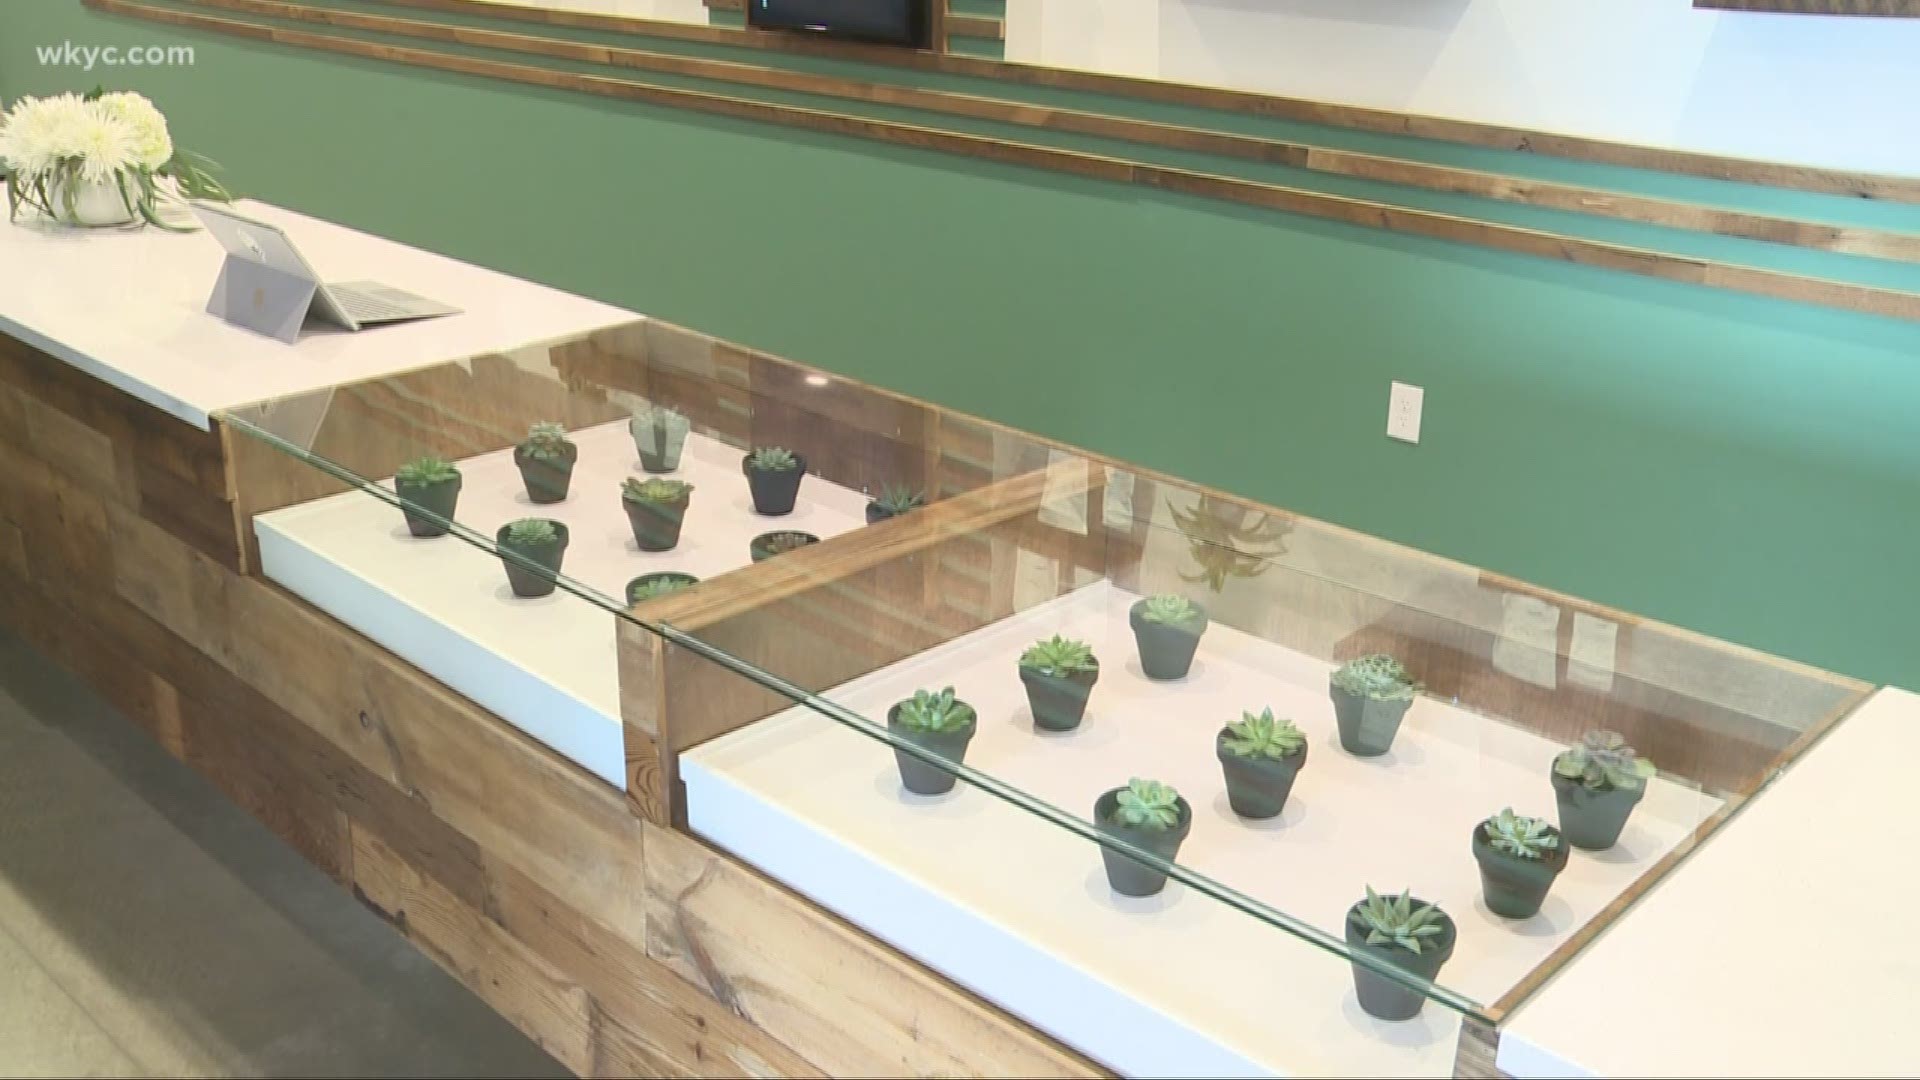 Jan. 16, 2019: It has been years in the making, but the day has finally arrived. Ohio’s first two medical marijuana dispensaries open their doors today in Canton and Sandusky.